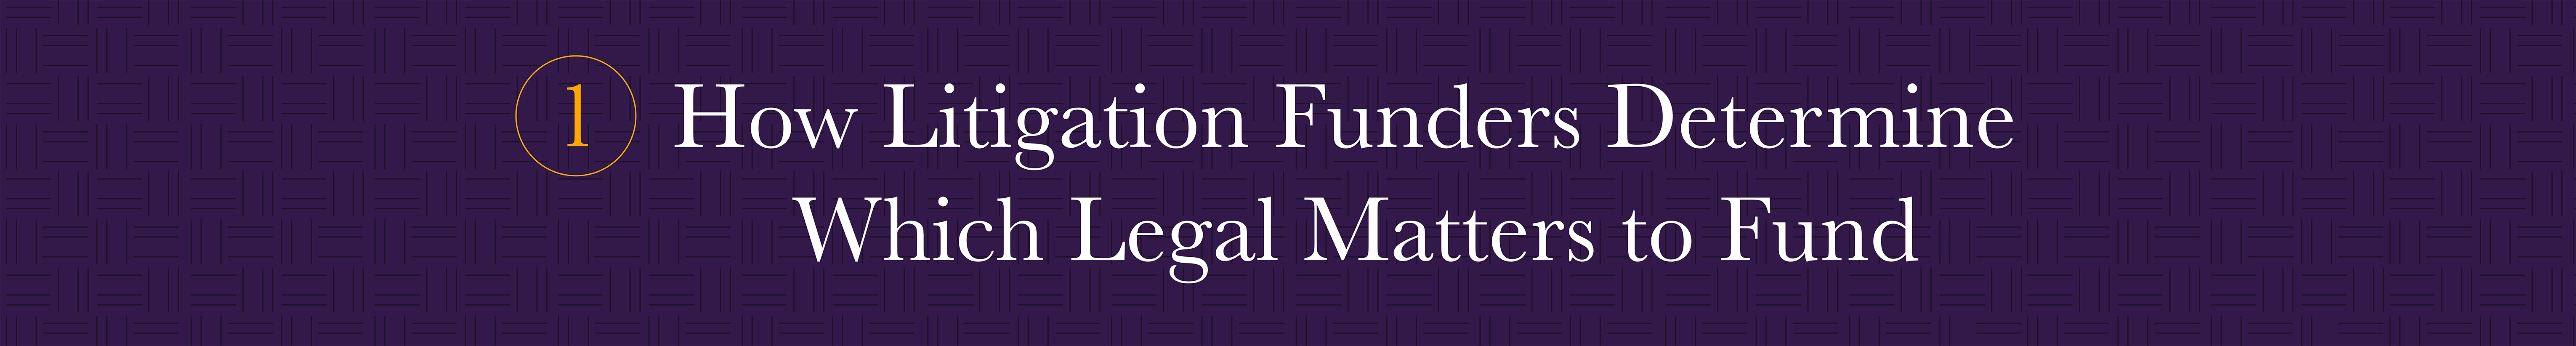 How-litigation-funders-determine-which-legal-matters-to-fund